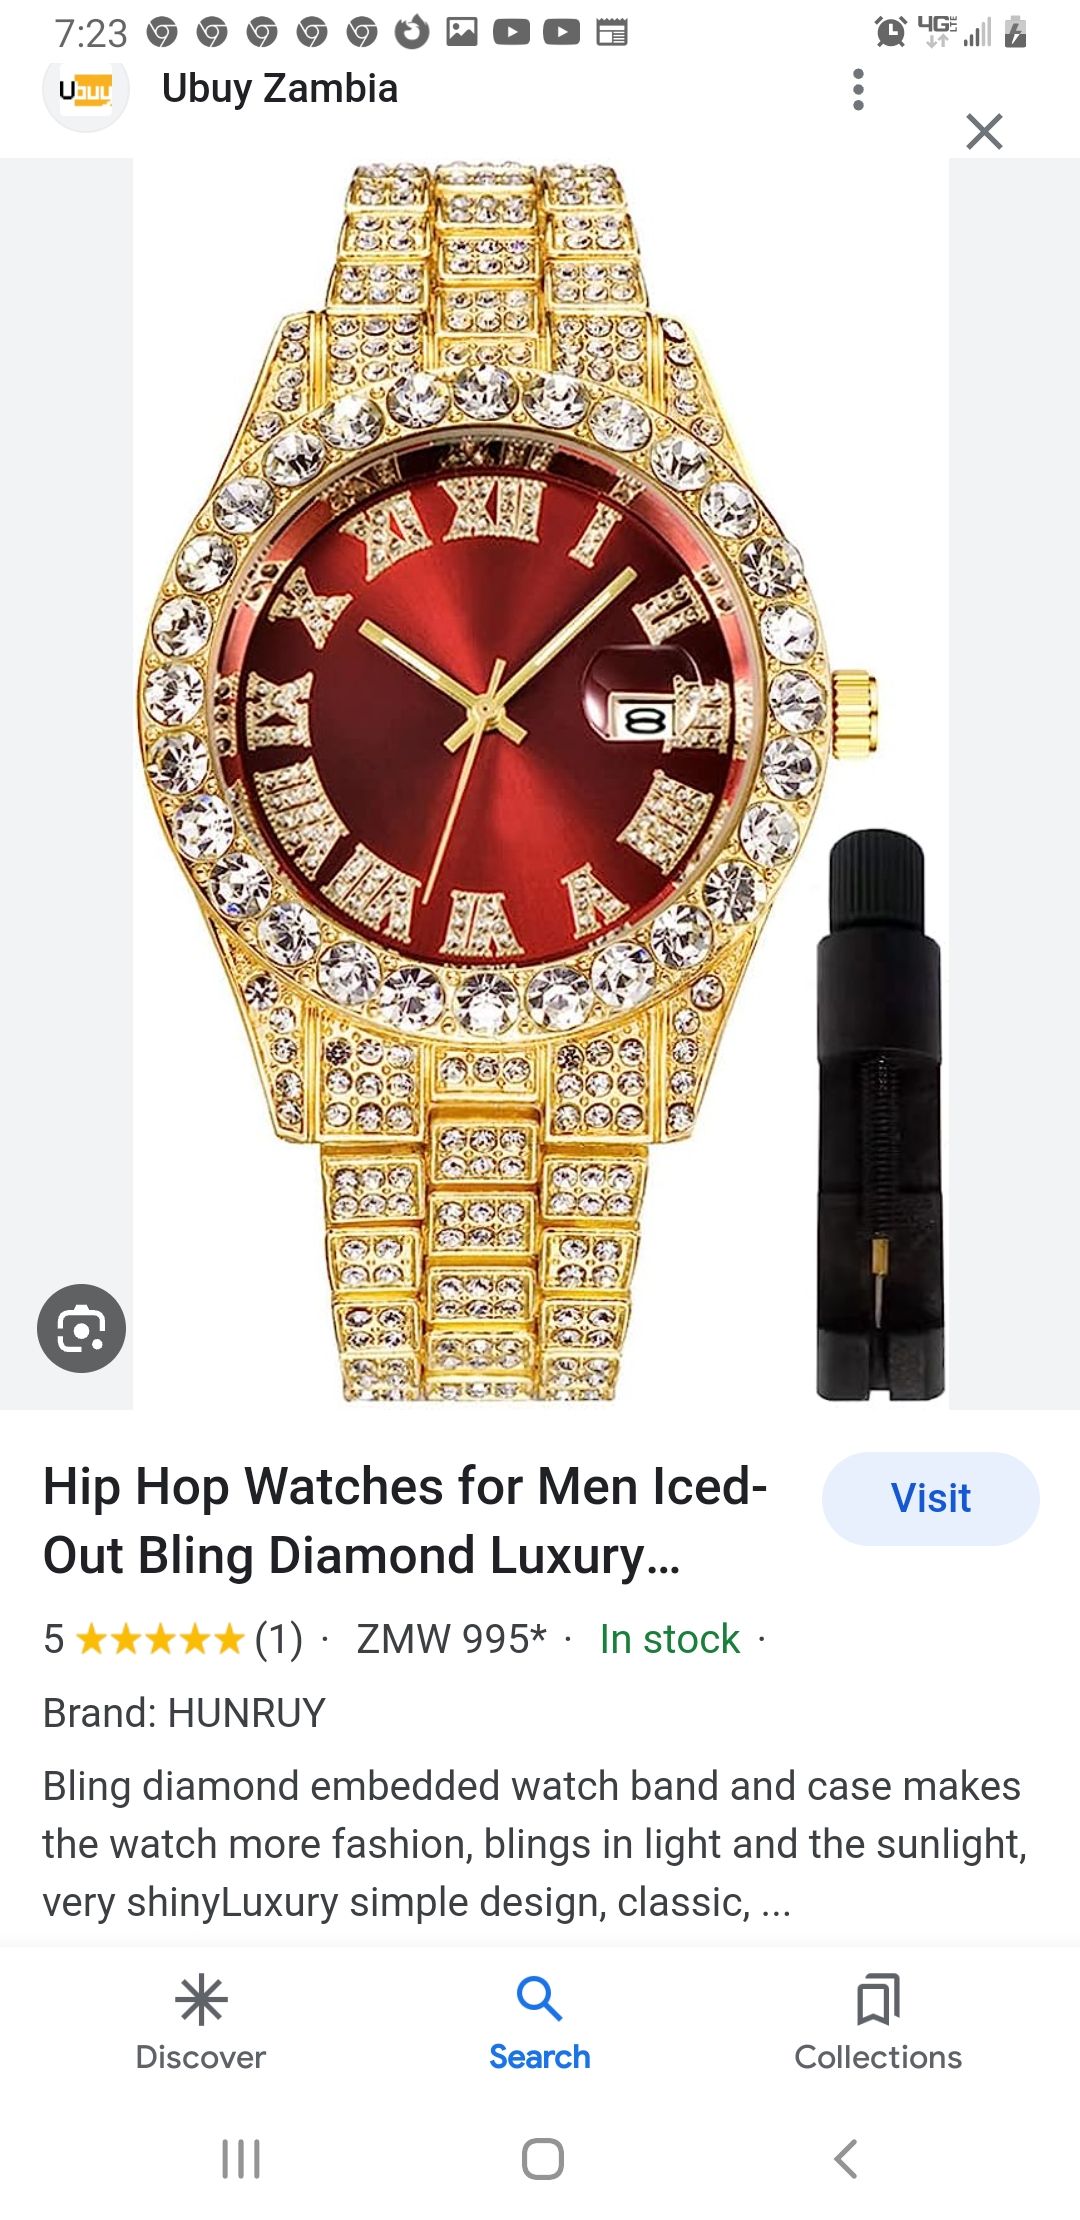 722909090000 LOOE oF. a
u Ubuy Zambia :

 

Hip Hop Watches for Men Iced- Visit
Out Bling Diamond Luxury...

5 (1) - ZMW 995* - In stock -

Brand: HUNRUY

Bling diamond embedded watch band and case makes
the watch more fashion, blings in light and the sunlight,
very shinyLuxury simple design, classic, ...

- Q A

Discover Search Collections

1 Oo <